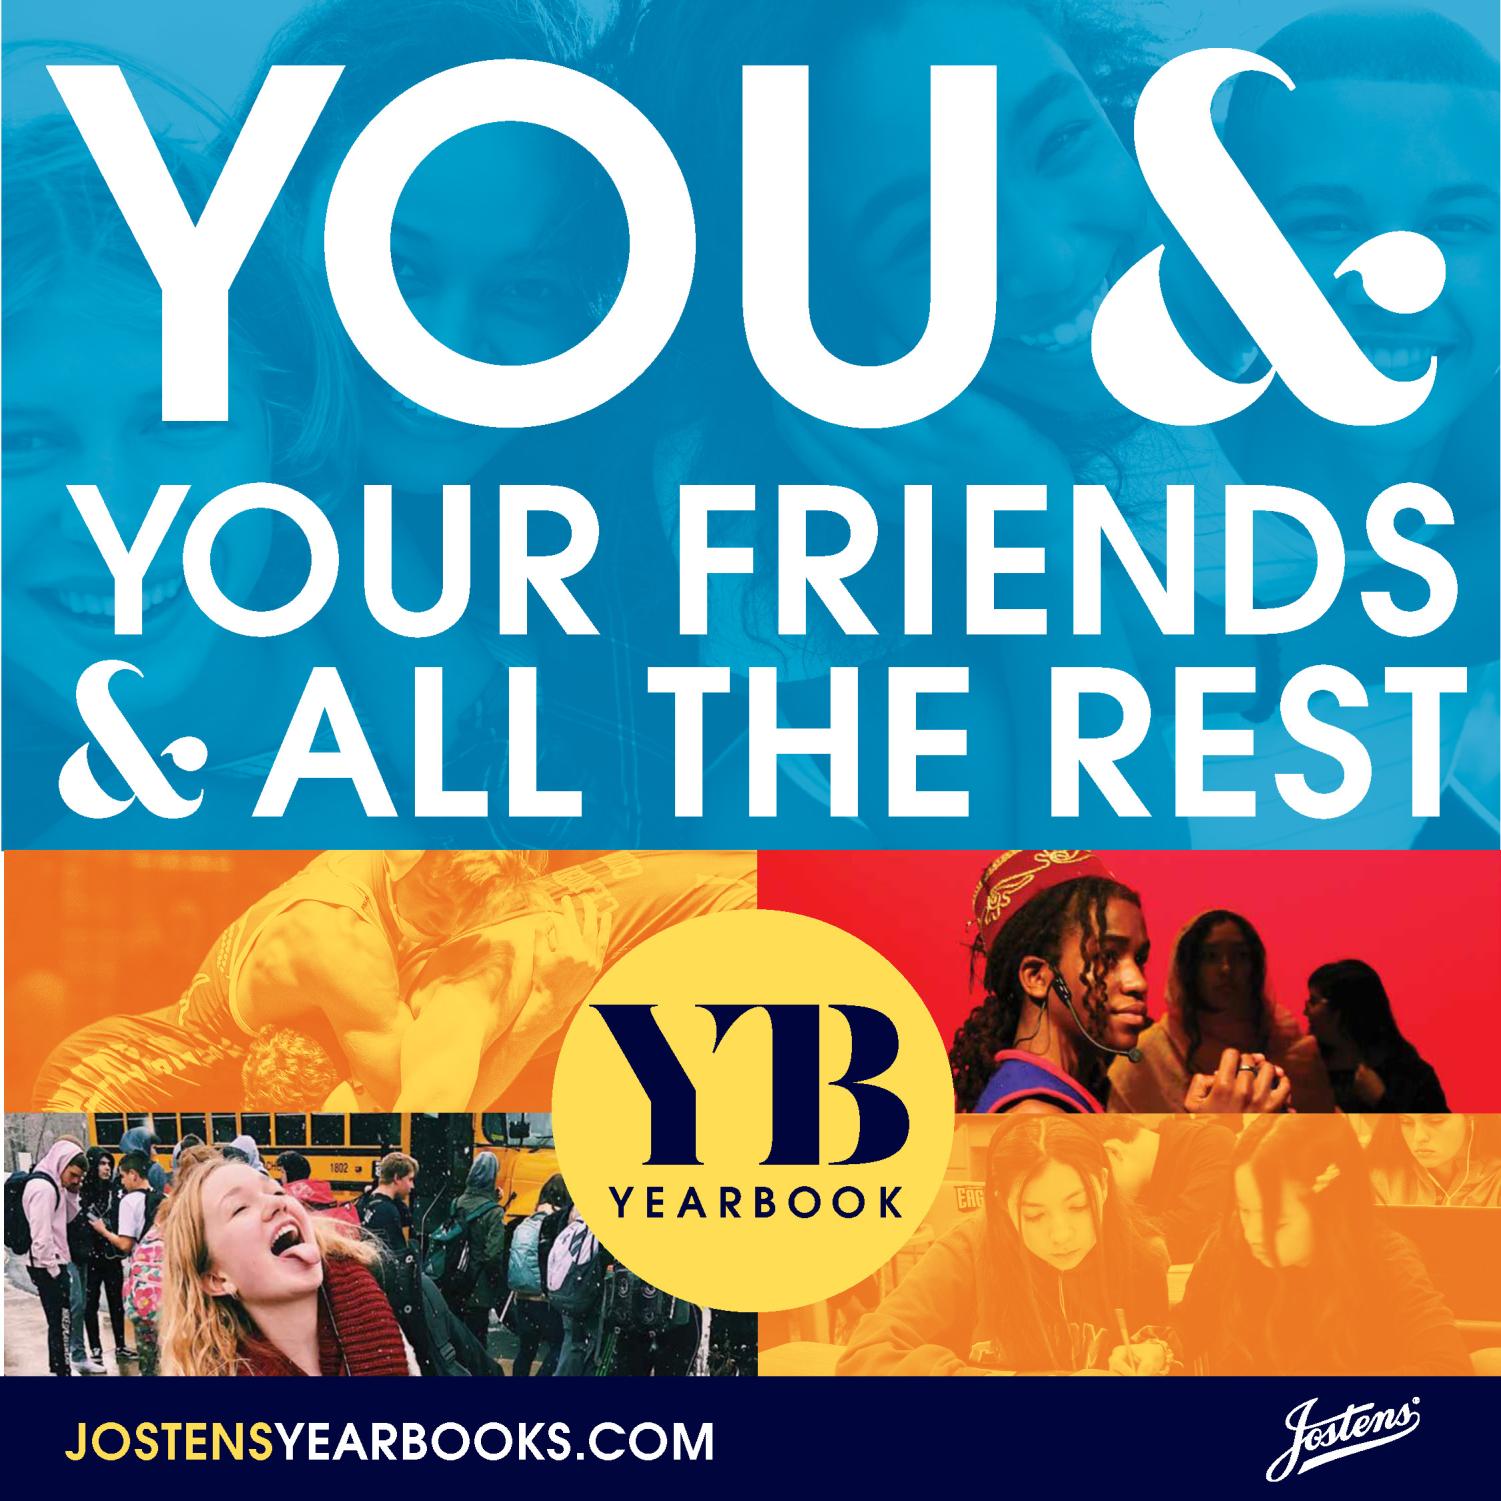 Buy your yearbook at www.jostensyearbooks.com